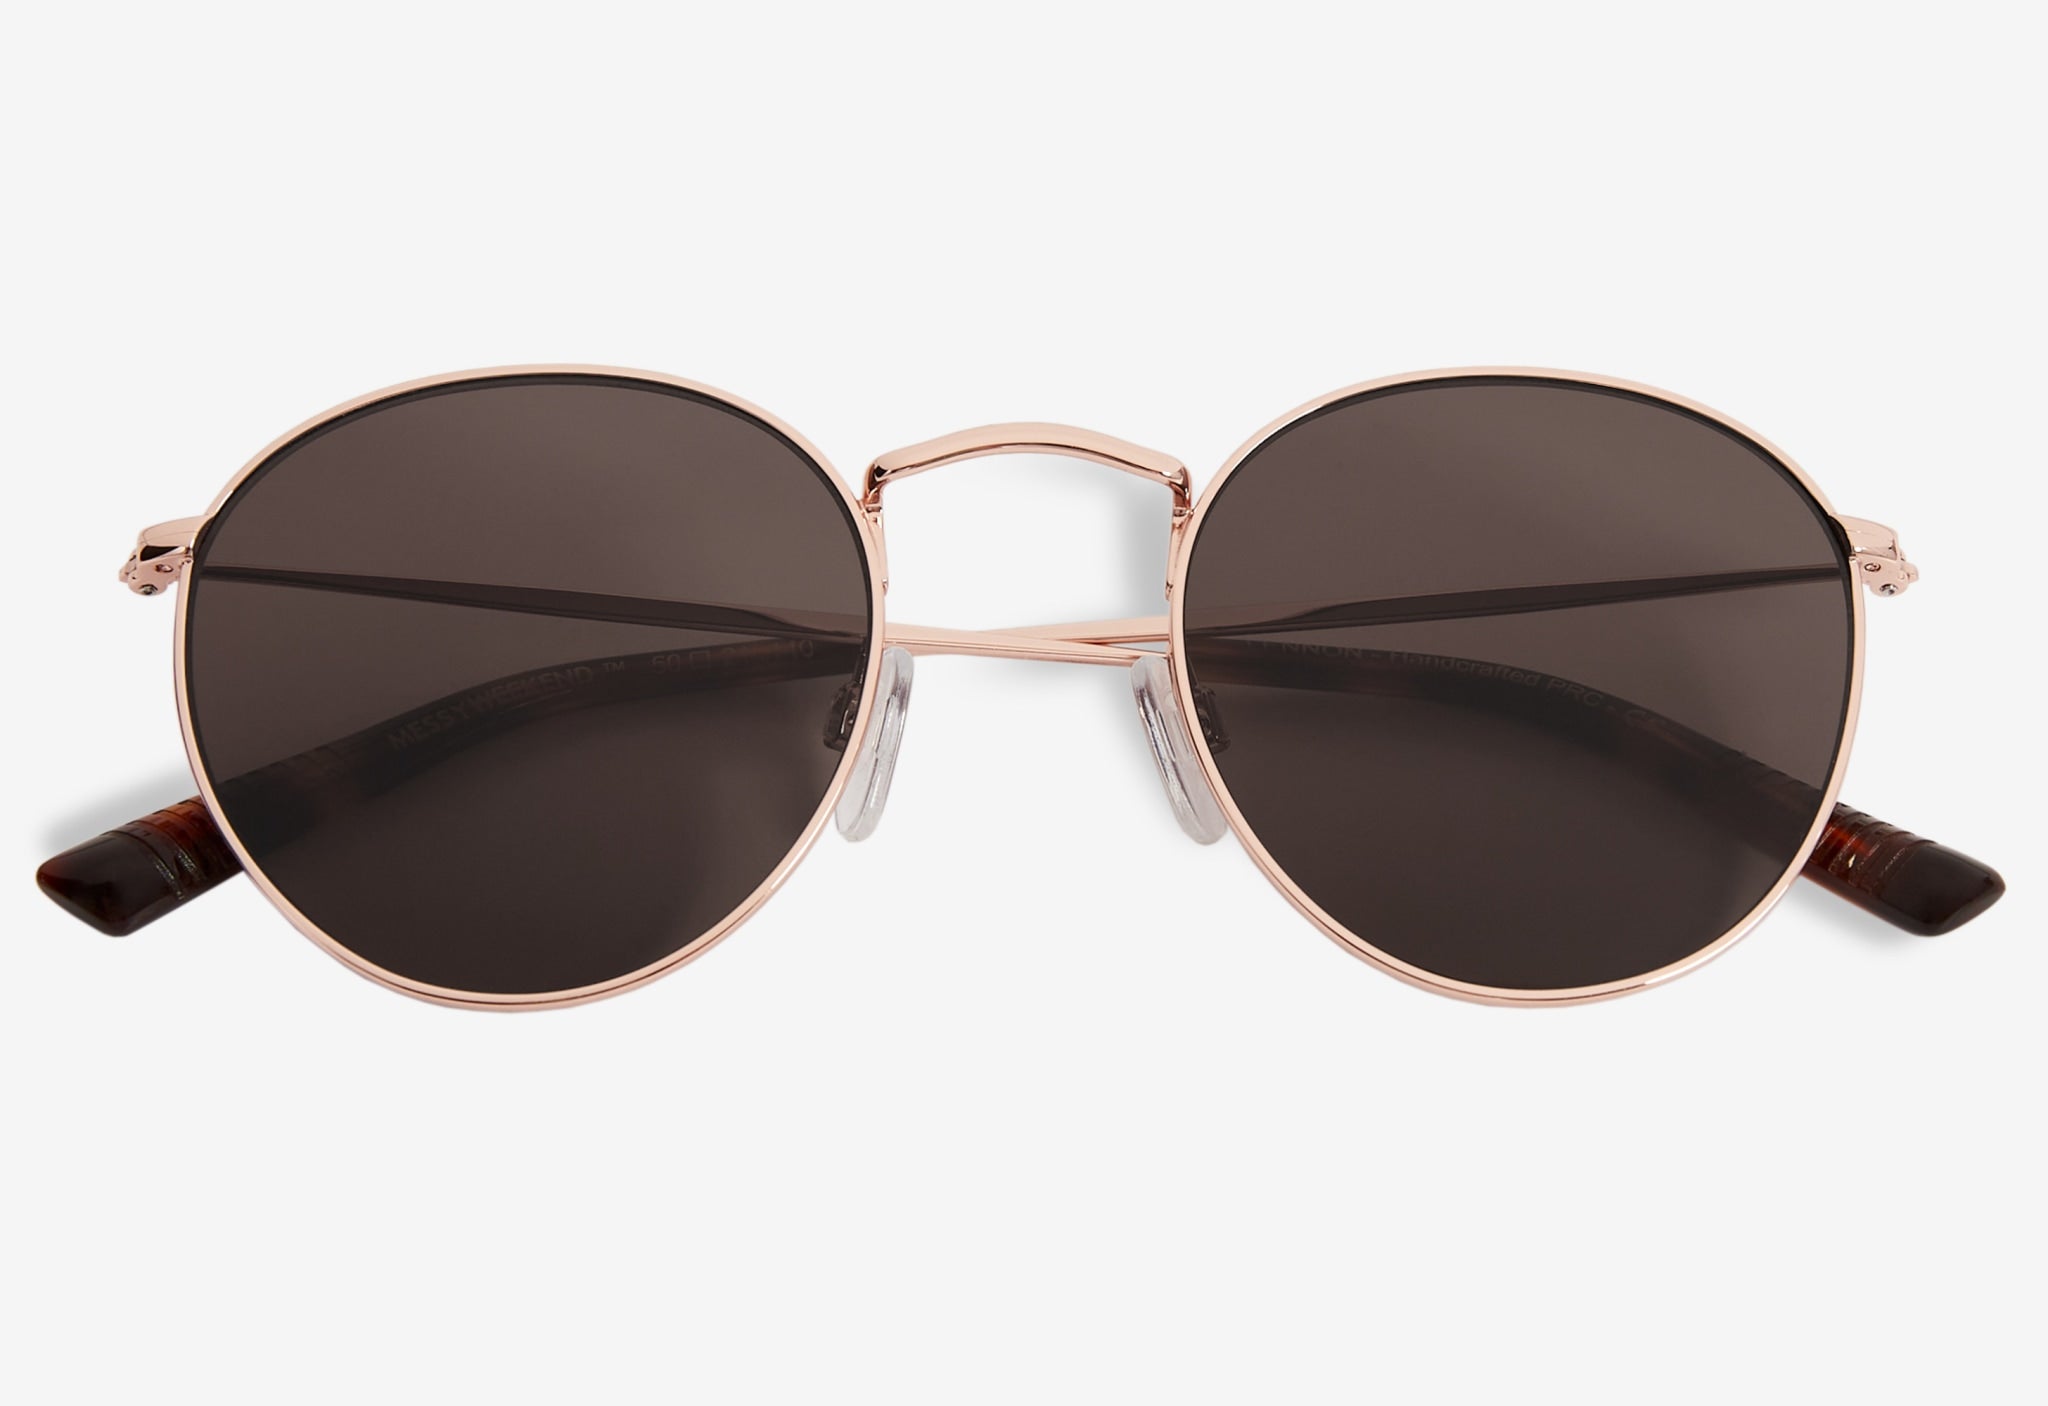 Round metal sunglasses with gold frame| MessyWeekend